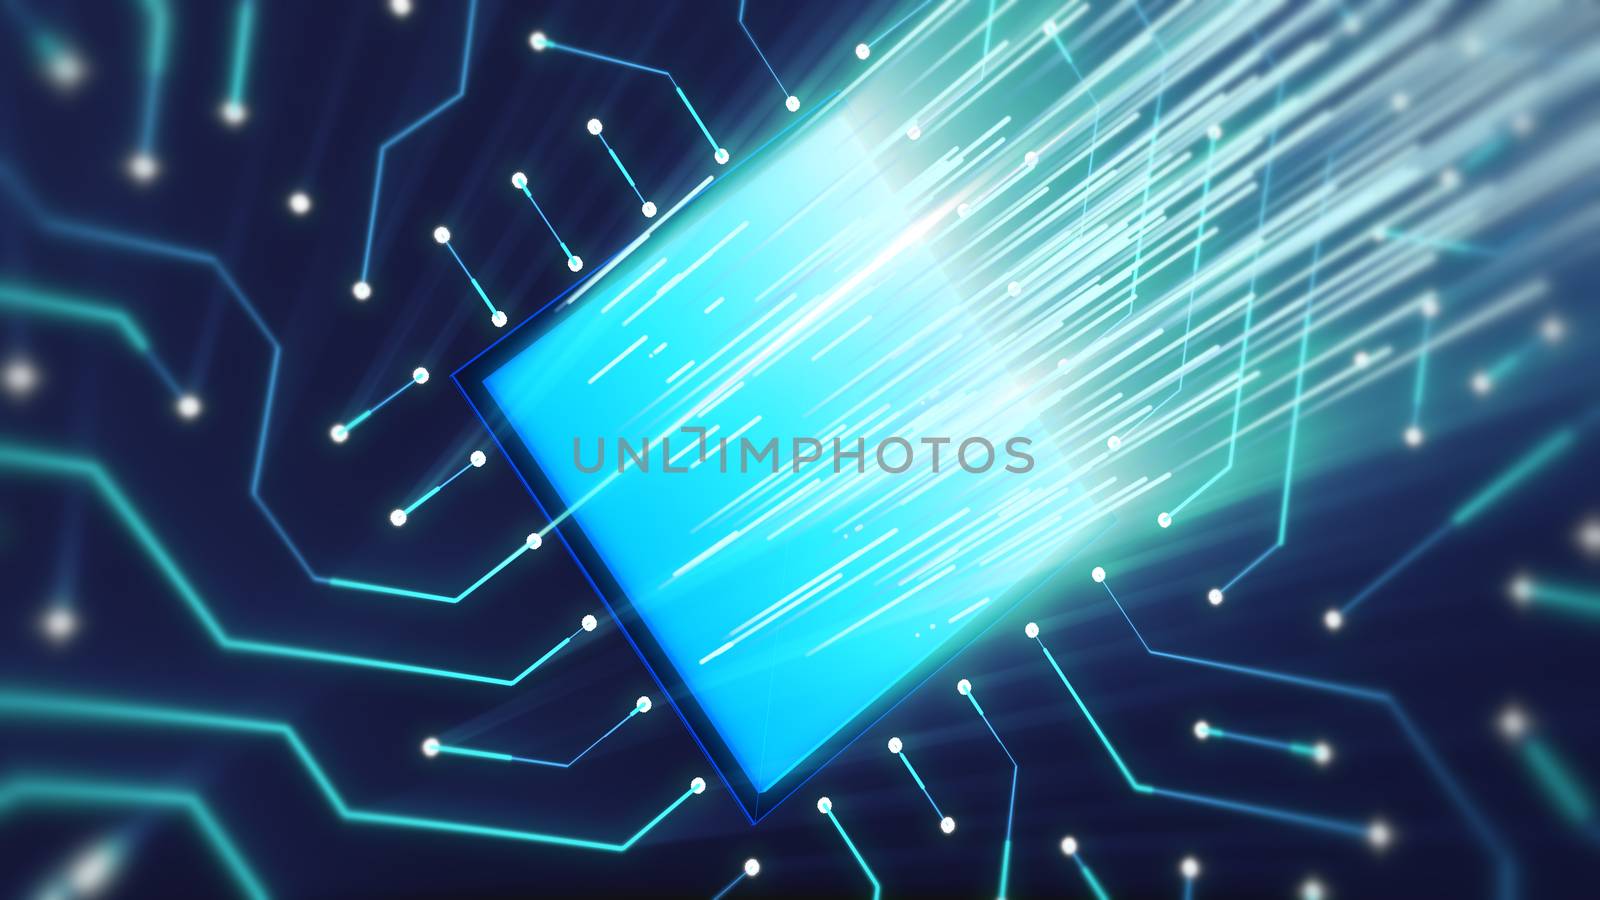 Optical art 3d illustration of a placed aside square blue microchip with pulsing white rays. It is located aslant on the board with crisscross electronic lines.